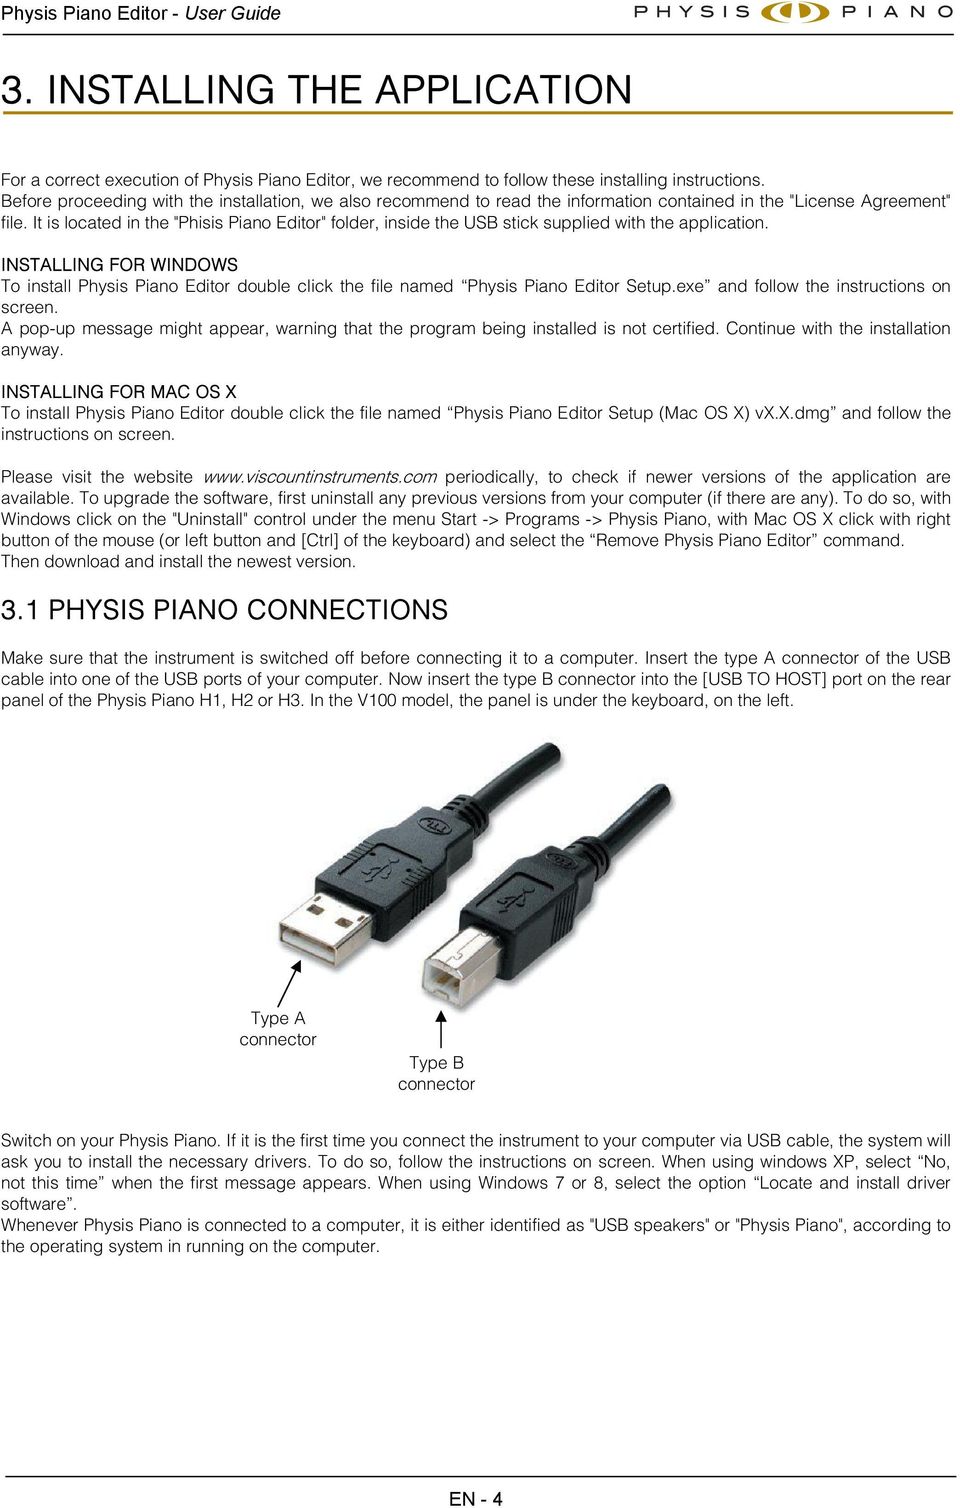 It is located in the "Phisis Piano Editor" folder, inside the USB stick supplied with the application.